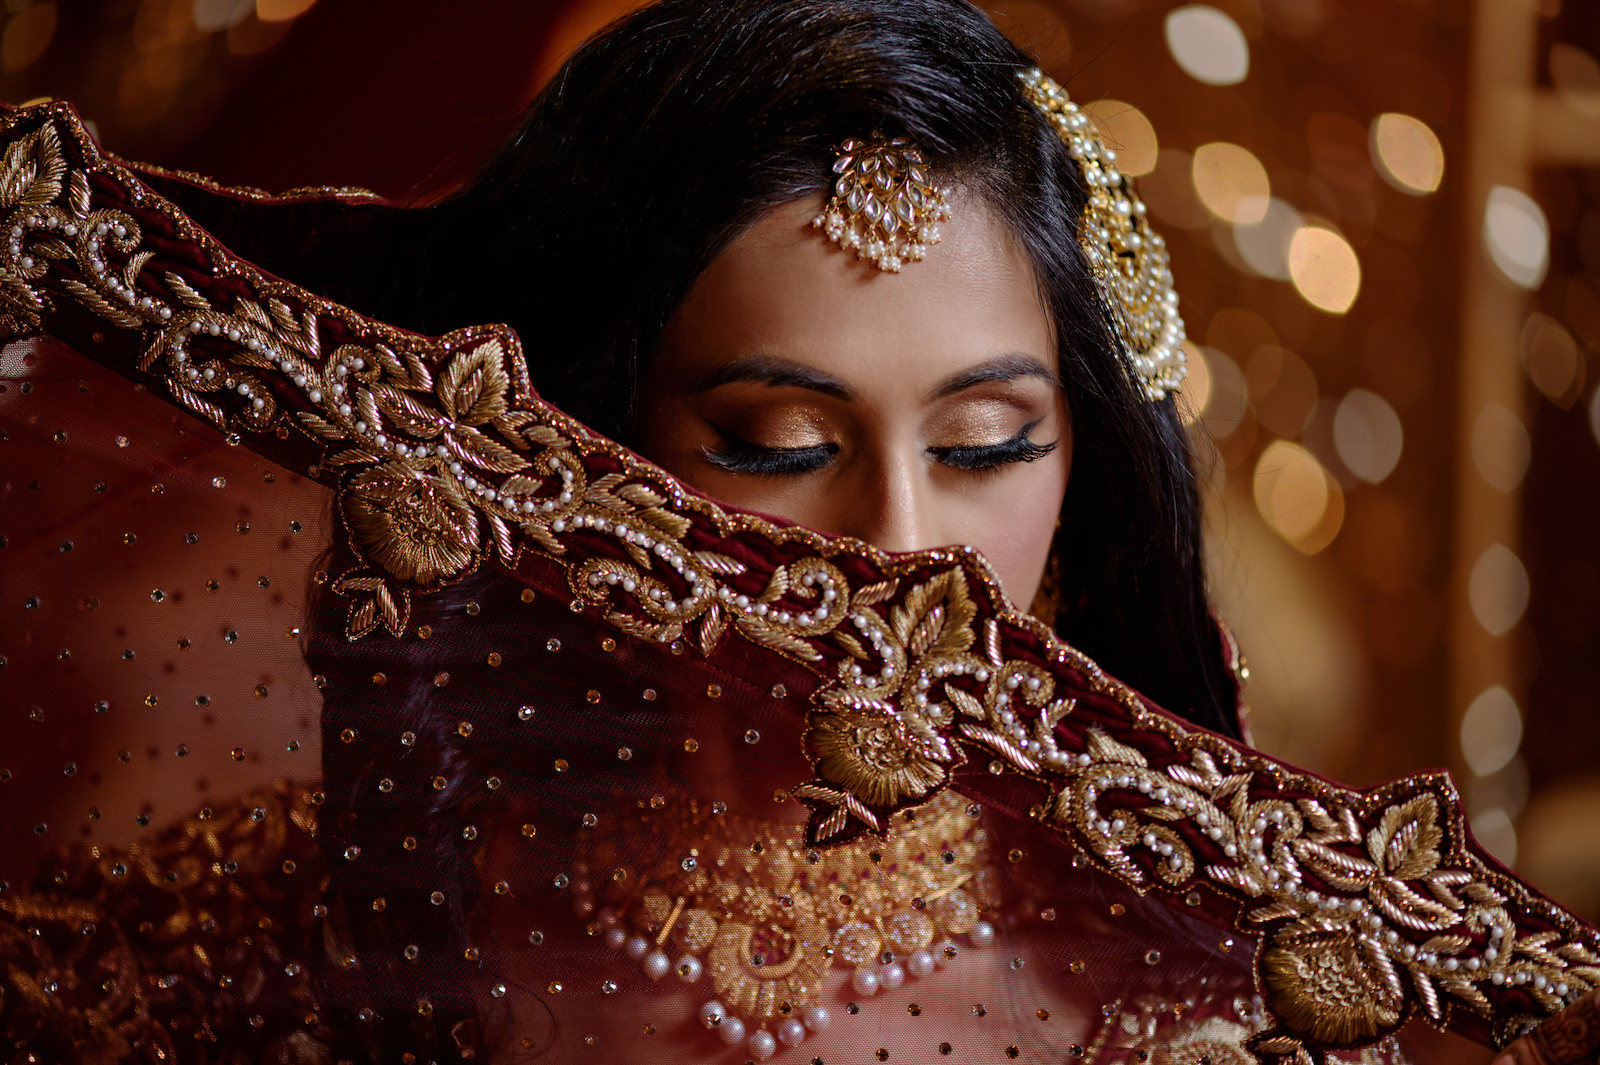 Elegant Florida Indian Wedding Bridal Portrait | Deep Red Burgundy and Gold Sequin and Pearl Embellished Wedding Bridal Sari and Veil | Tampa Bay Wedding Hair and Makeup Artist Michele Renee the Studio